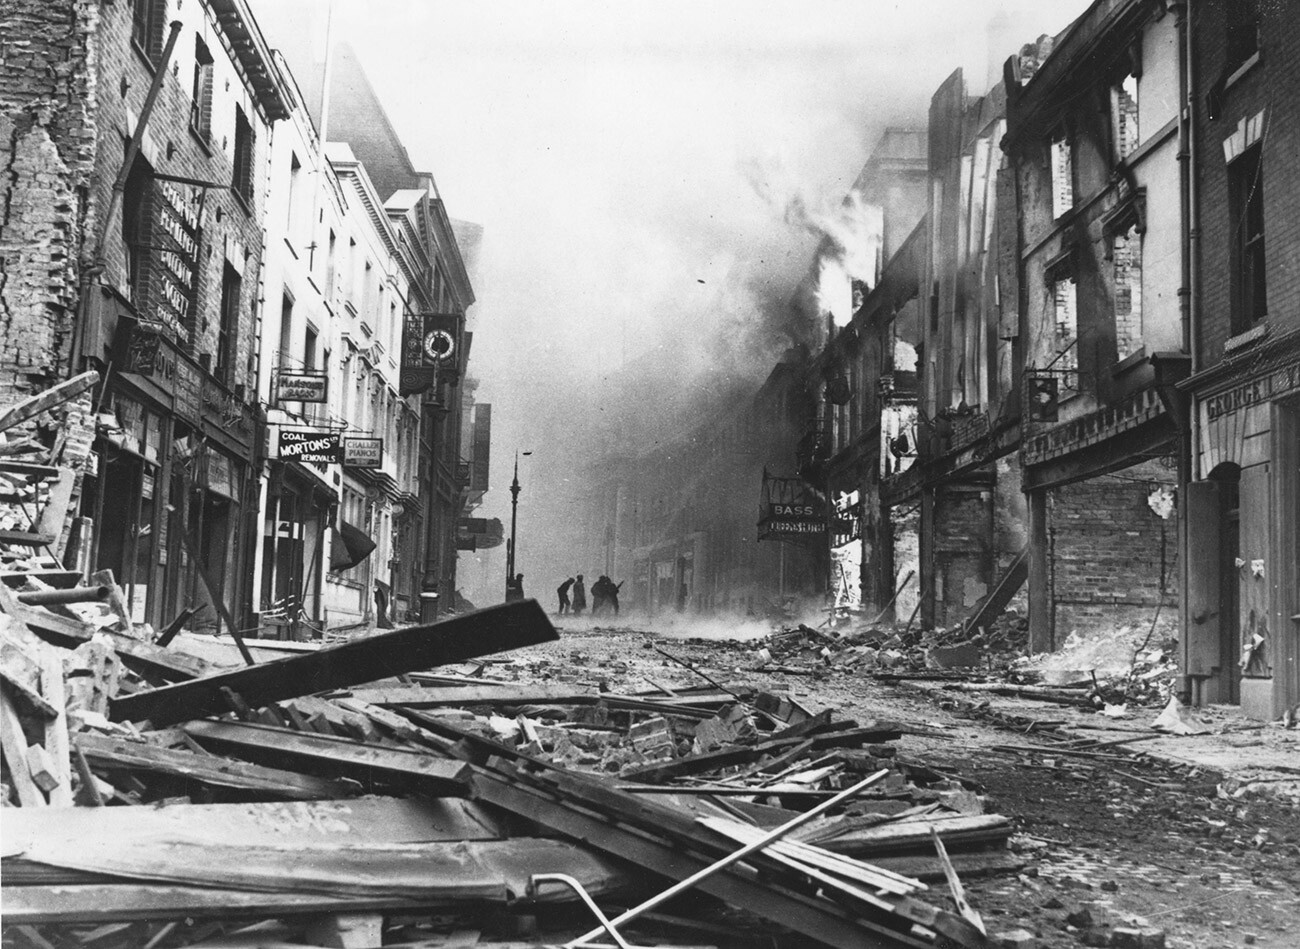 Hertford Street in Coventry after German bombing raids.